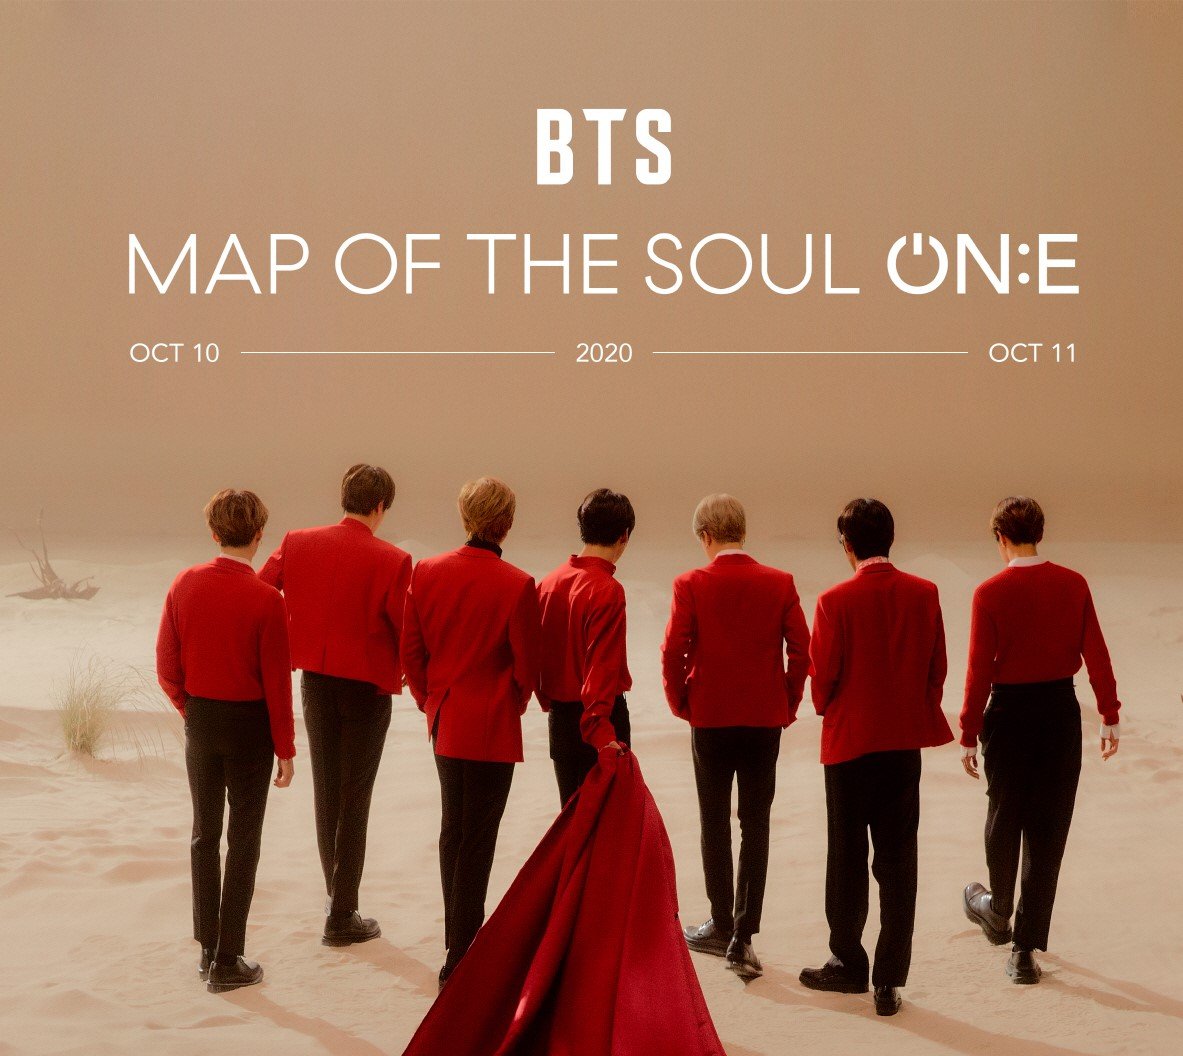 BTS' 'Map of the Soul ON:E' Offline Concert Is Cancelled and Will